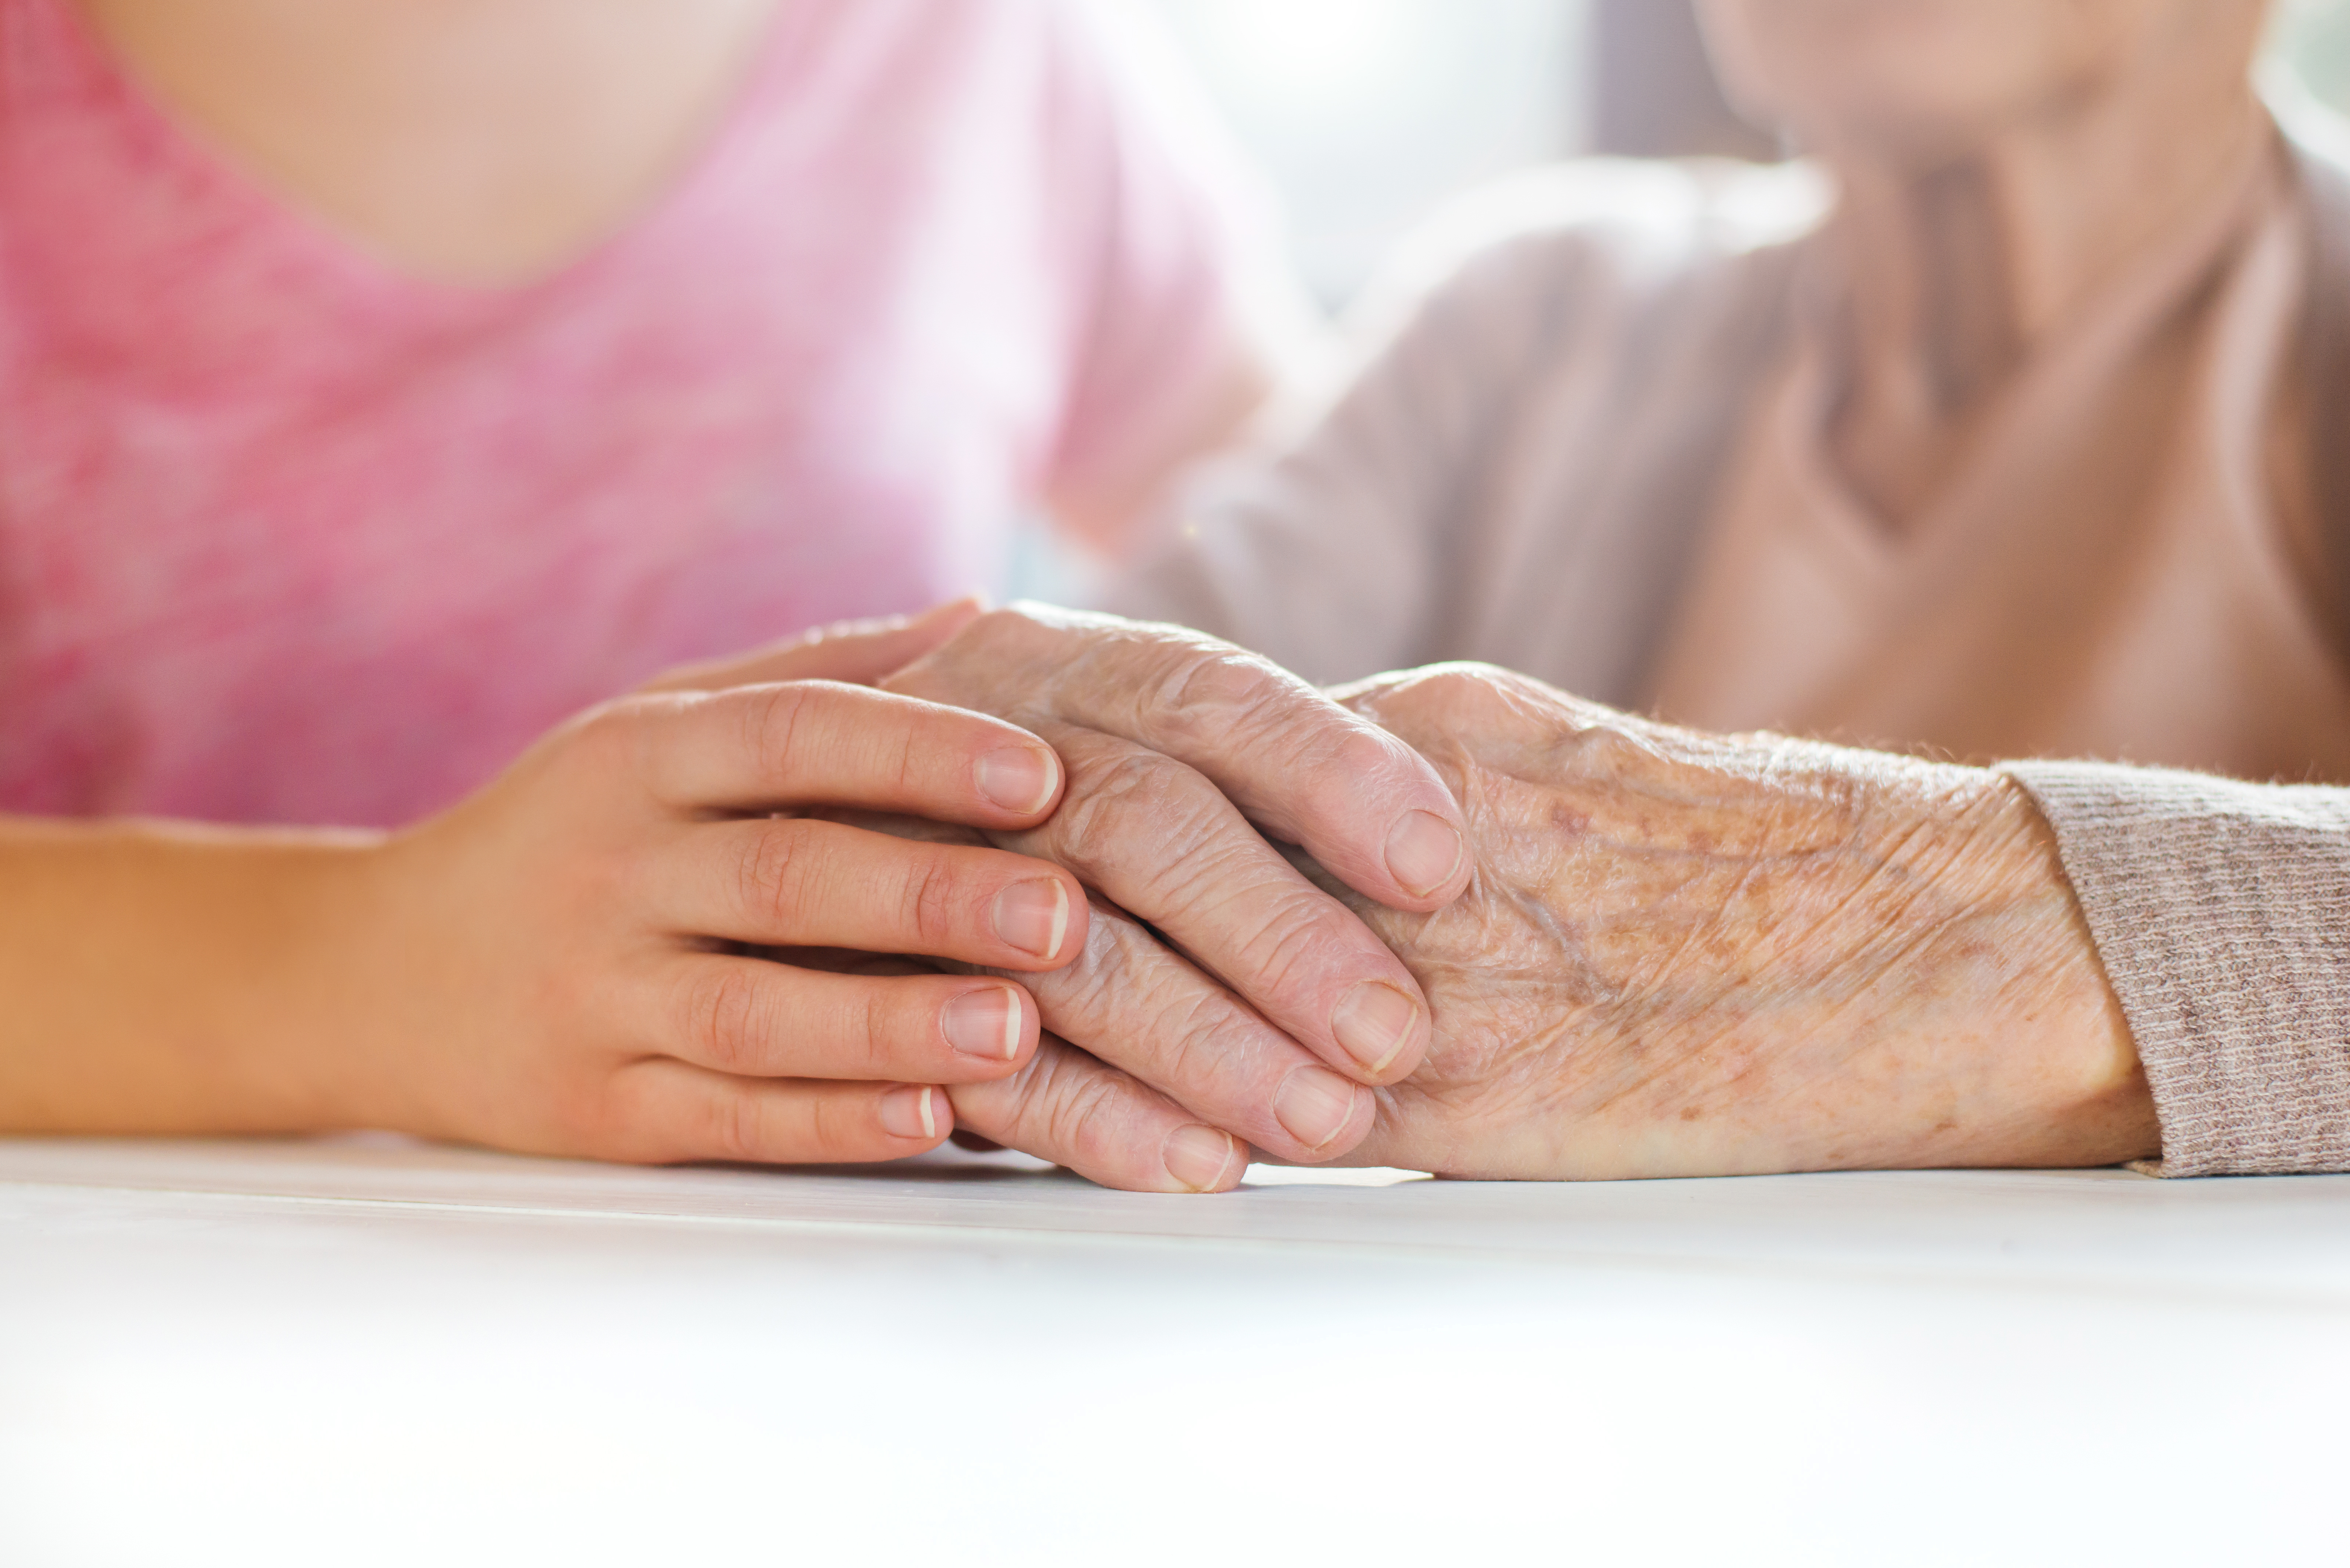 Do You Struggle with Being a Primary Caregiver?